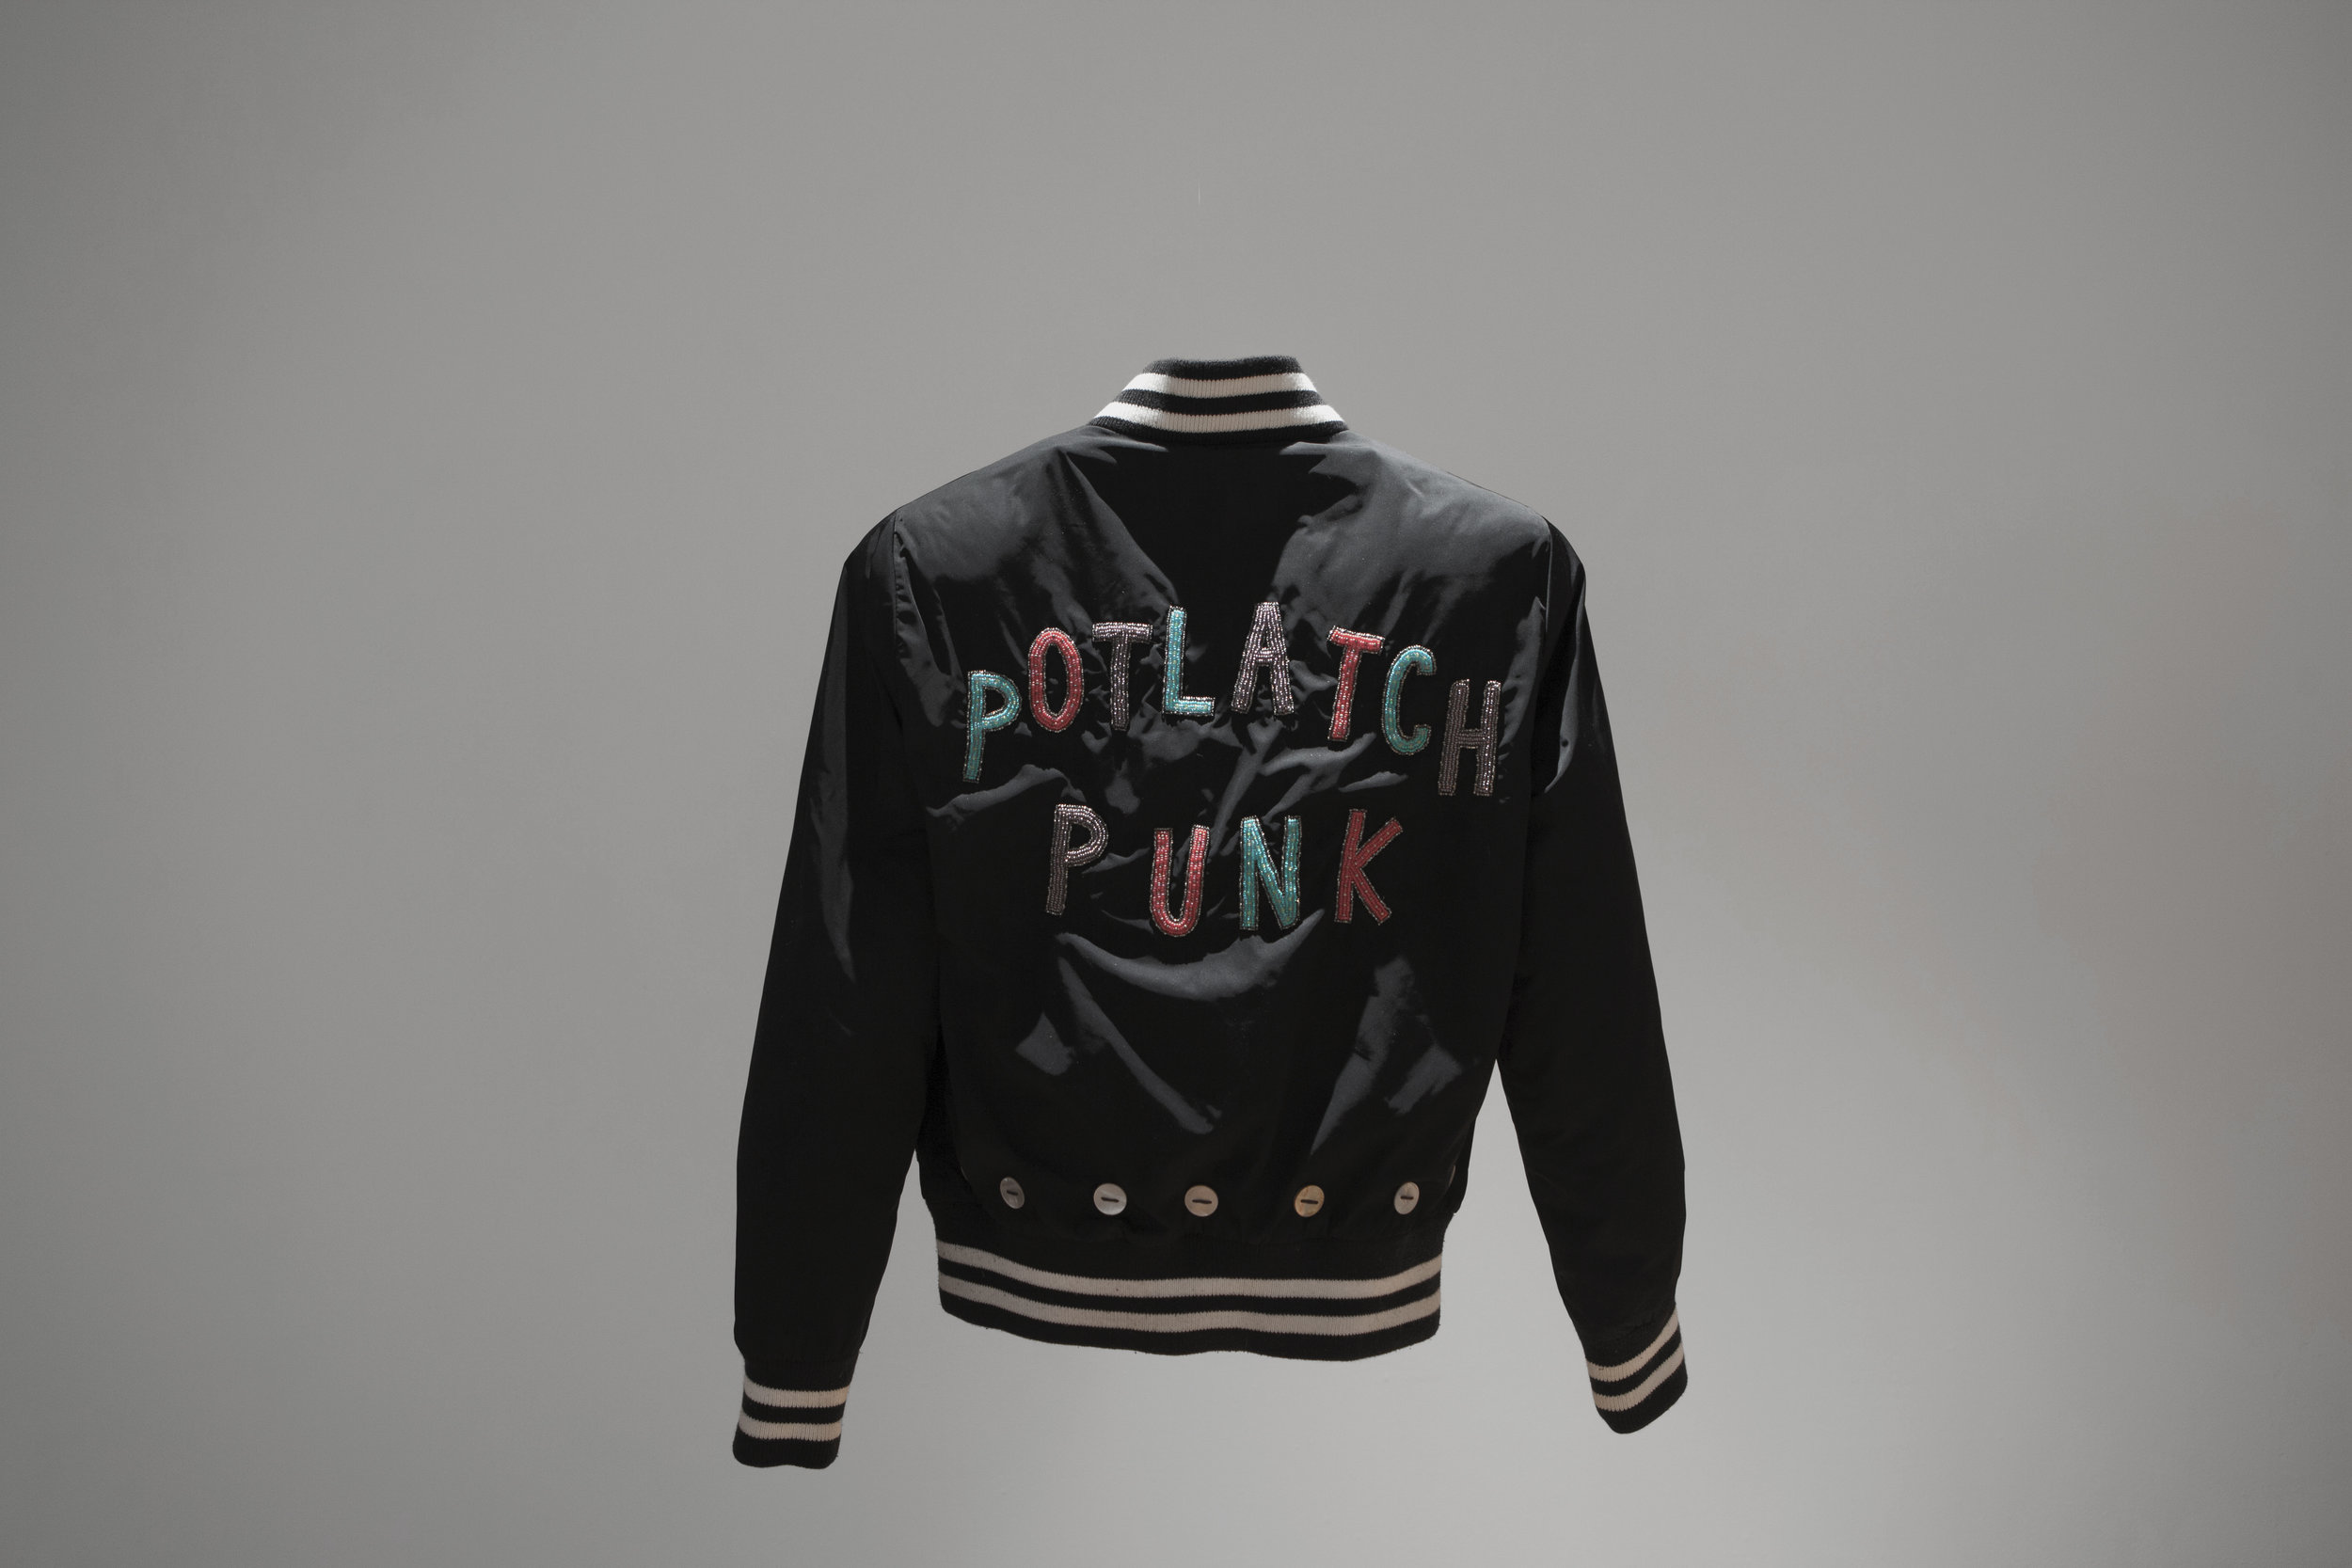   Potlatch Punk , beading and buttons on small sports jacket, 2016 